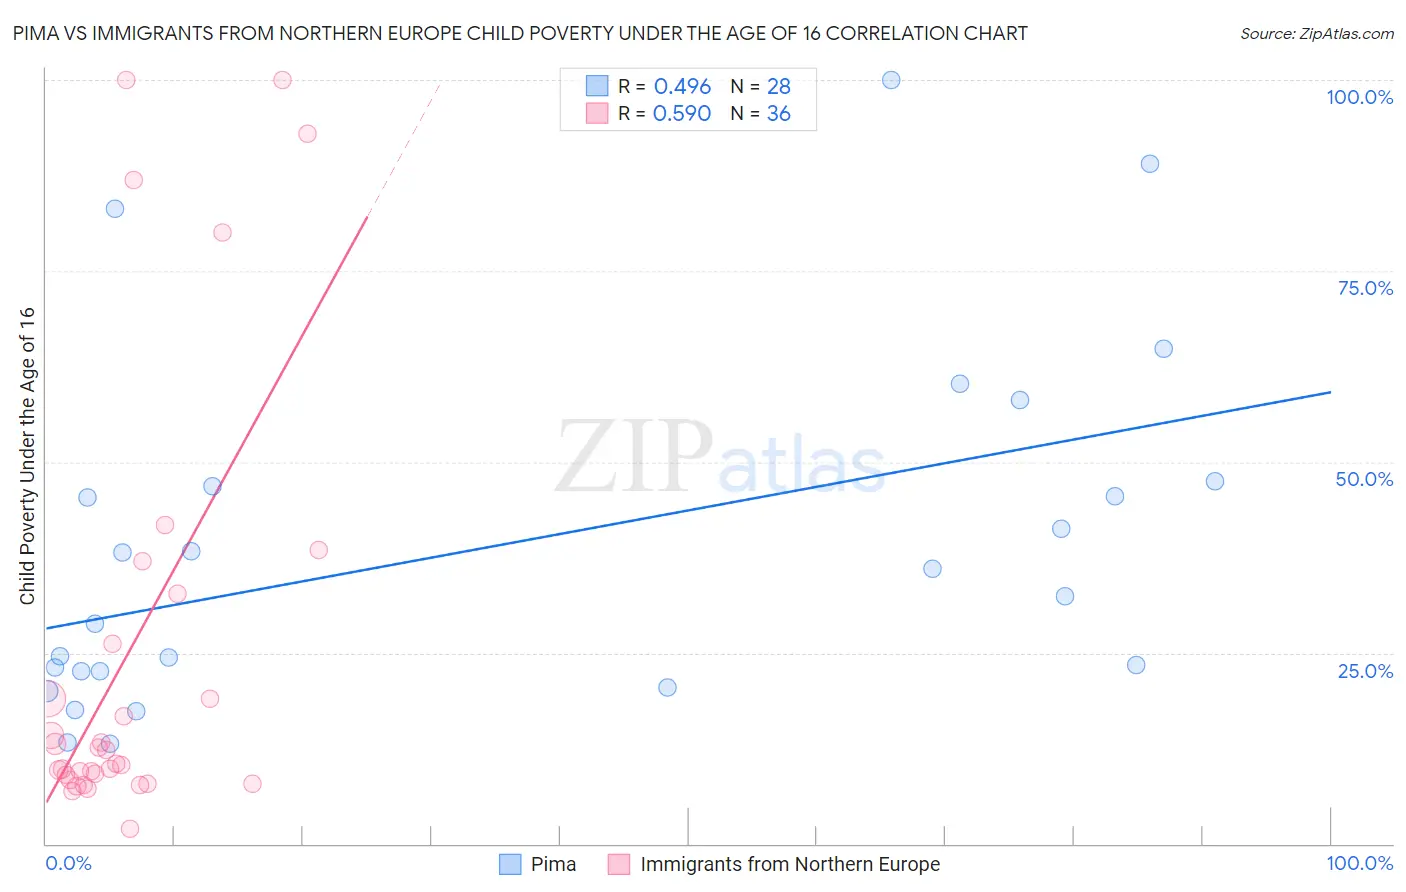 Pima vs Immigrants from Northern Europe Child Poverty Under the Age of 16